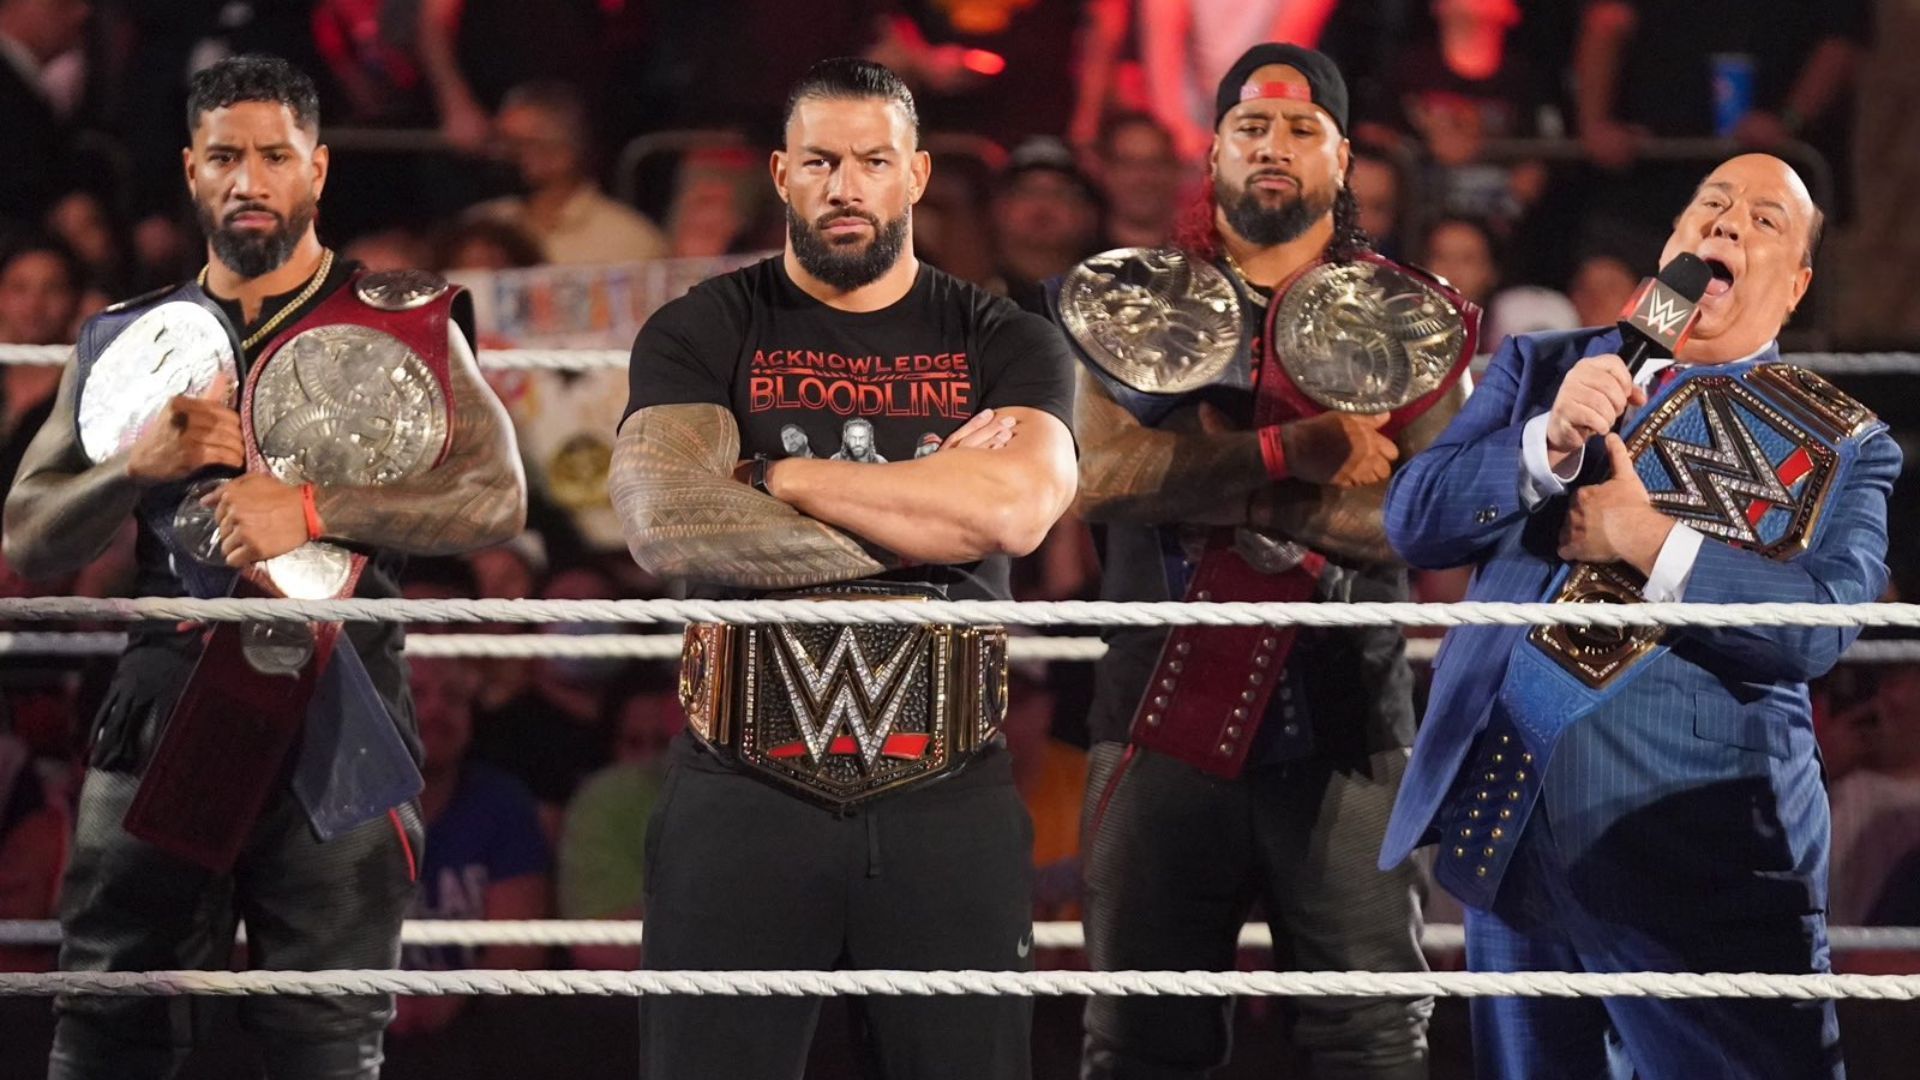 Left to right: Jey Uso, Roman Reigns, Jimmy Uso, and Paul Heyman